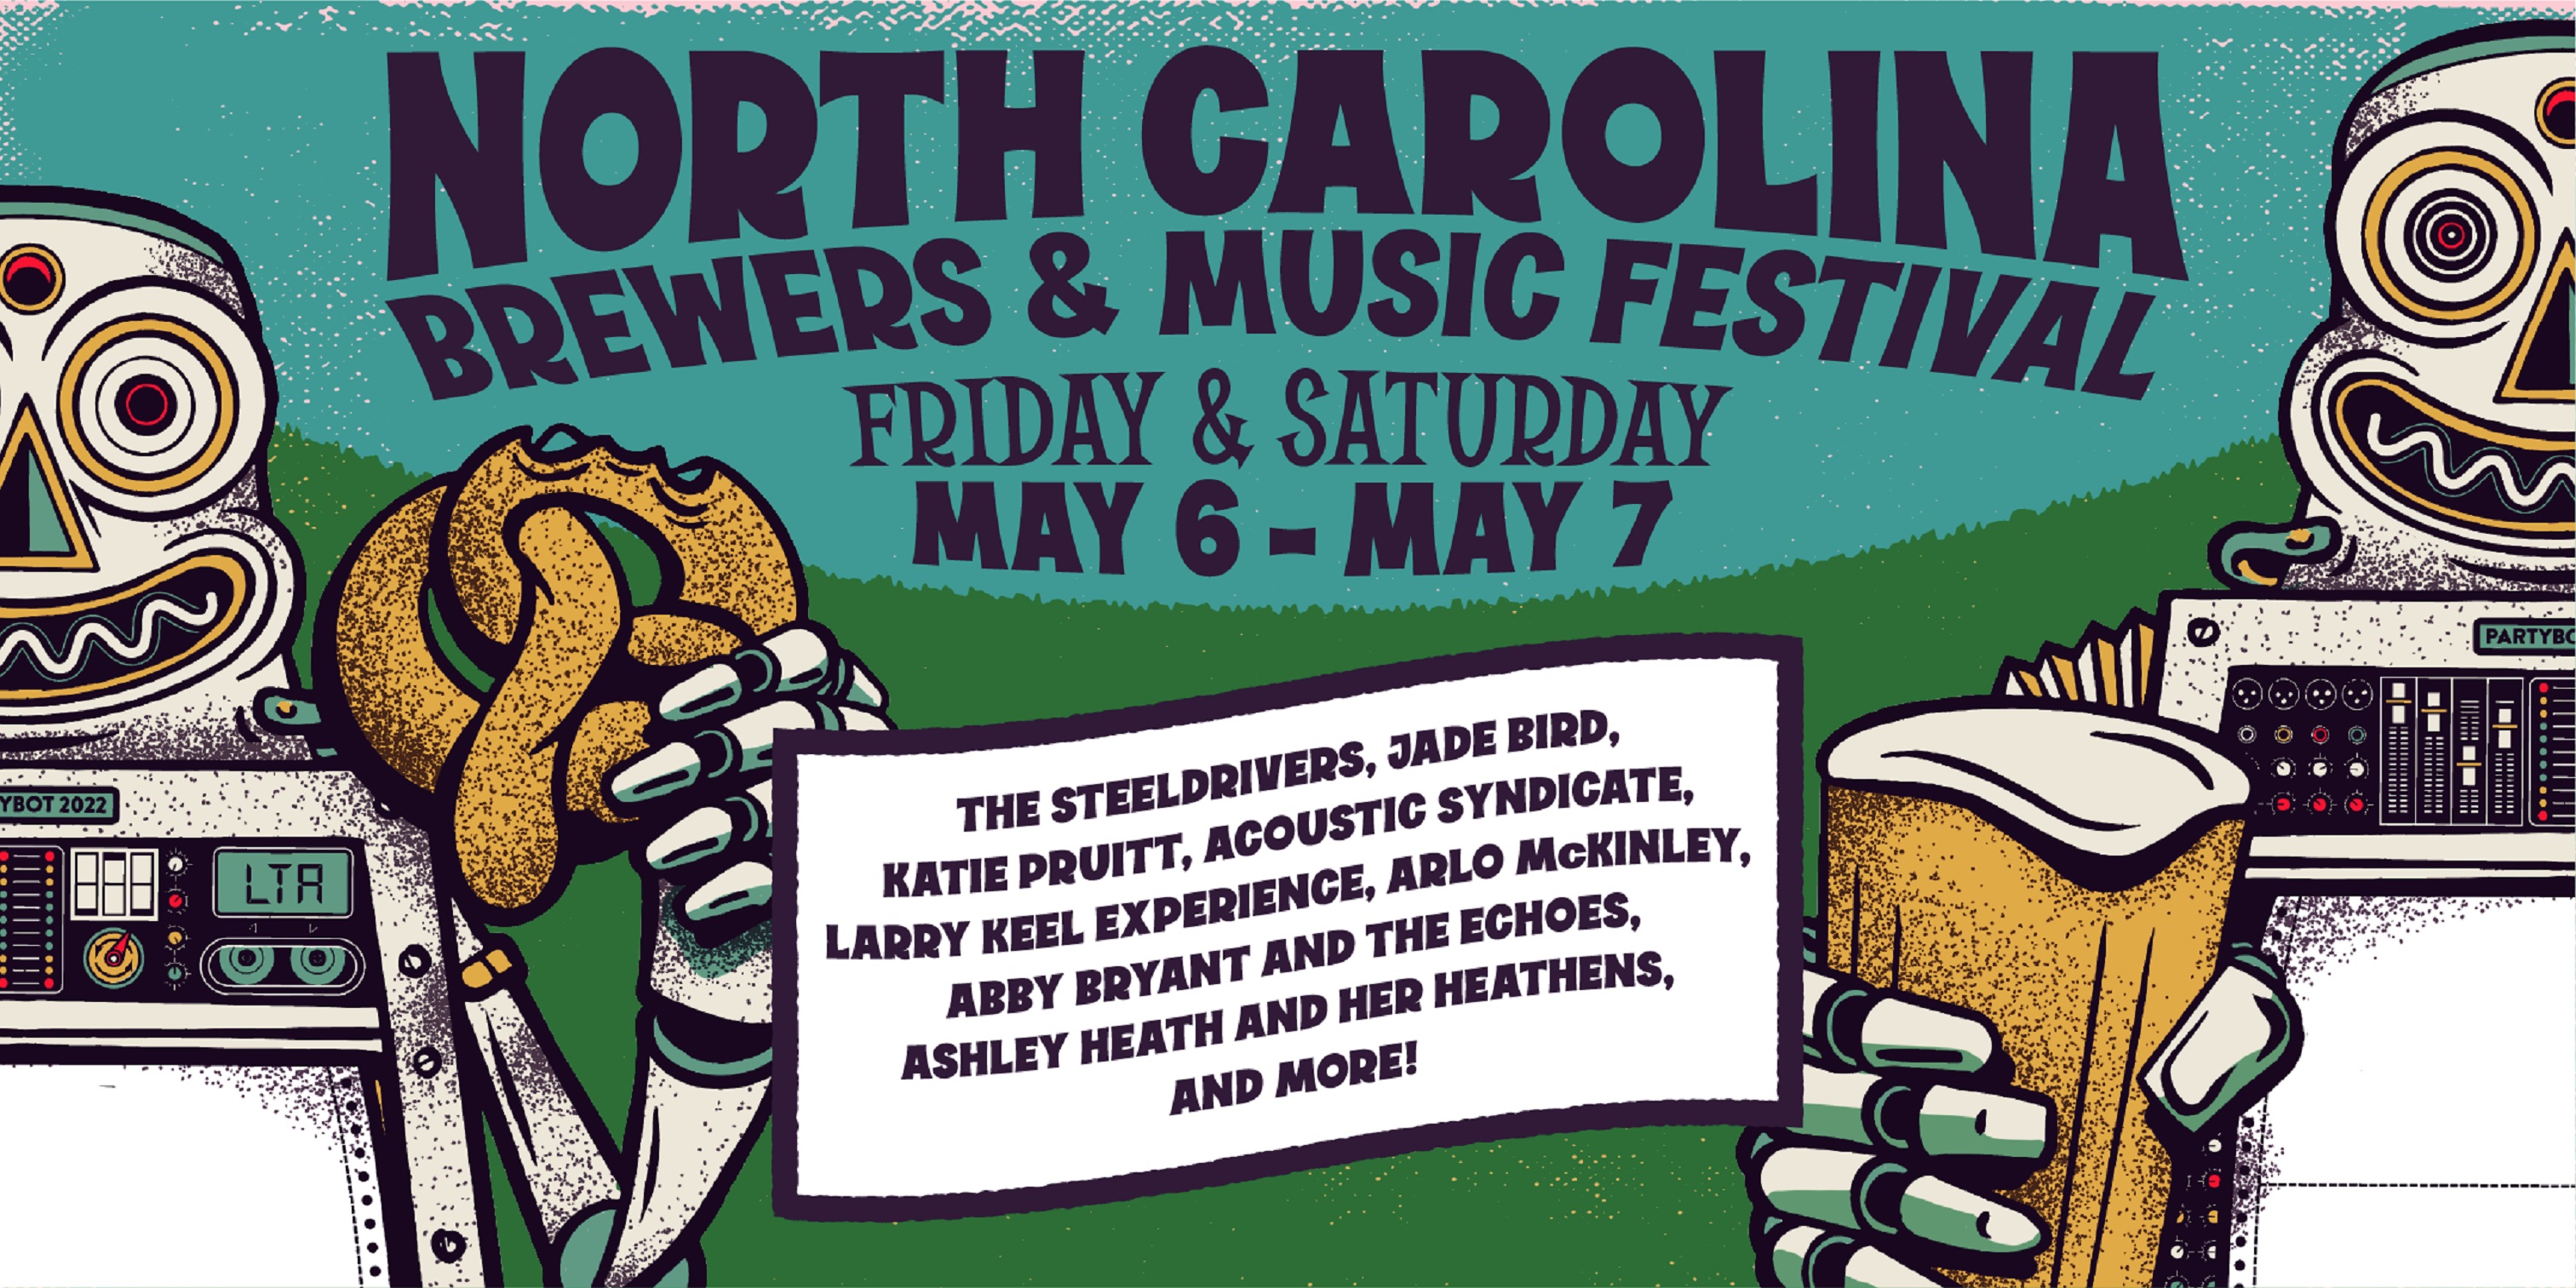 NORTH CAROLINA BREWERS AND MUSIC FESTIVAL ANNOUNCES THE STEELDRIVERS, JADE BIRD, KATIE PRUITT, AND MORE FOR 10TH ANNIVERSARY LINEUP